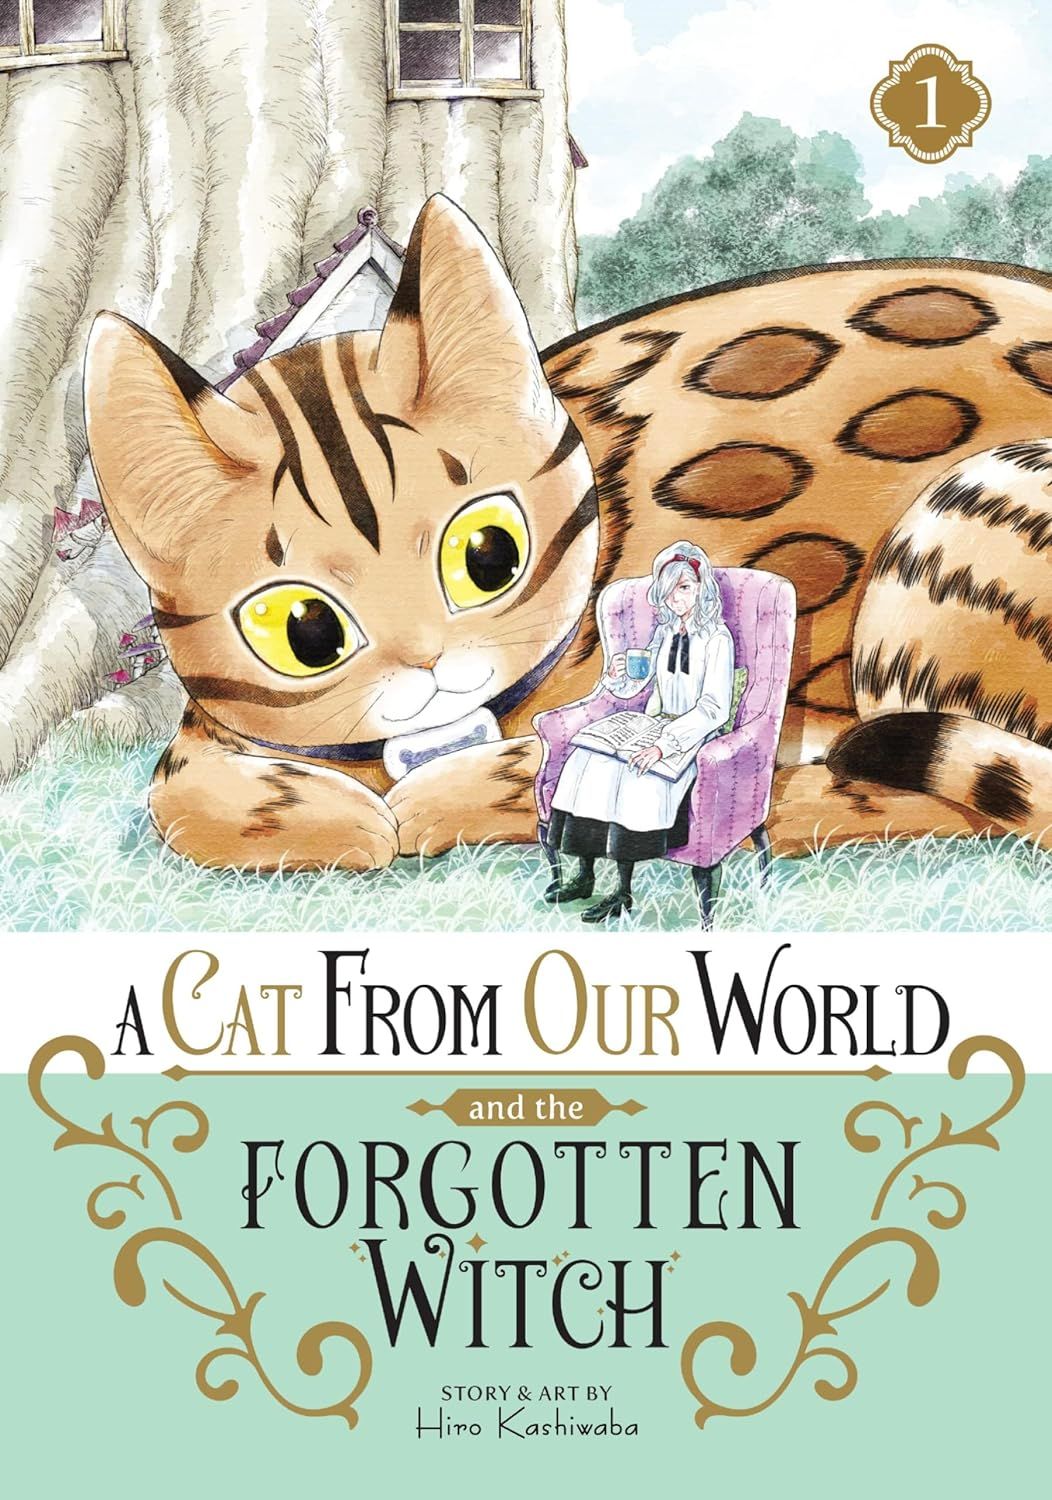 A Cat From Our World and the Forgotten Witch by Hiro Kashiwaba cover